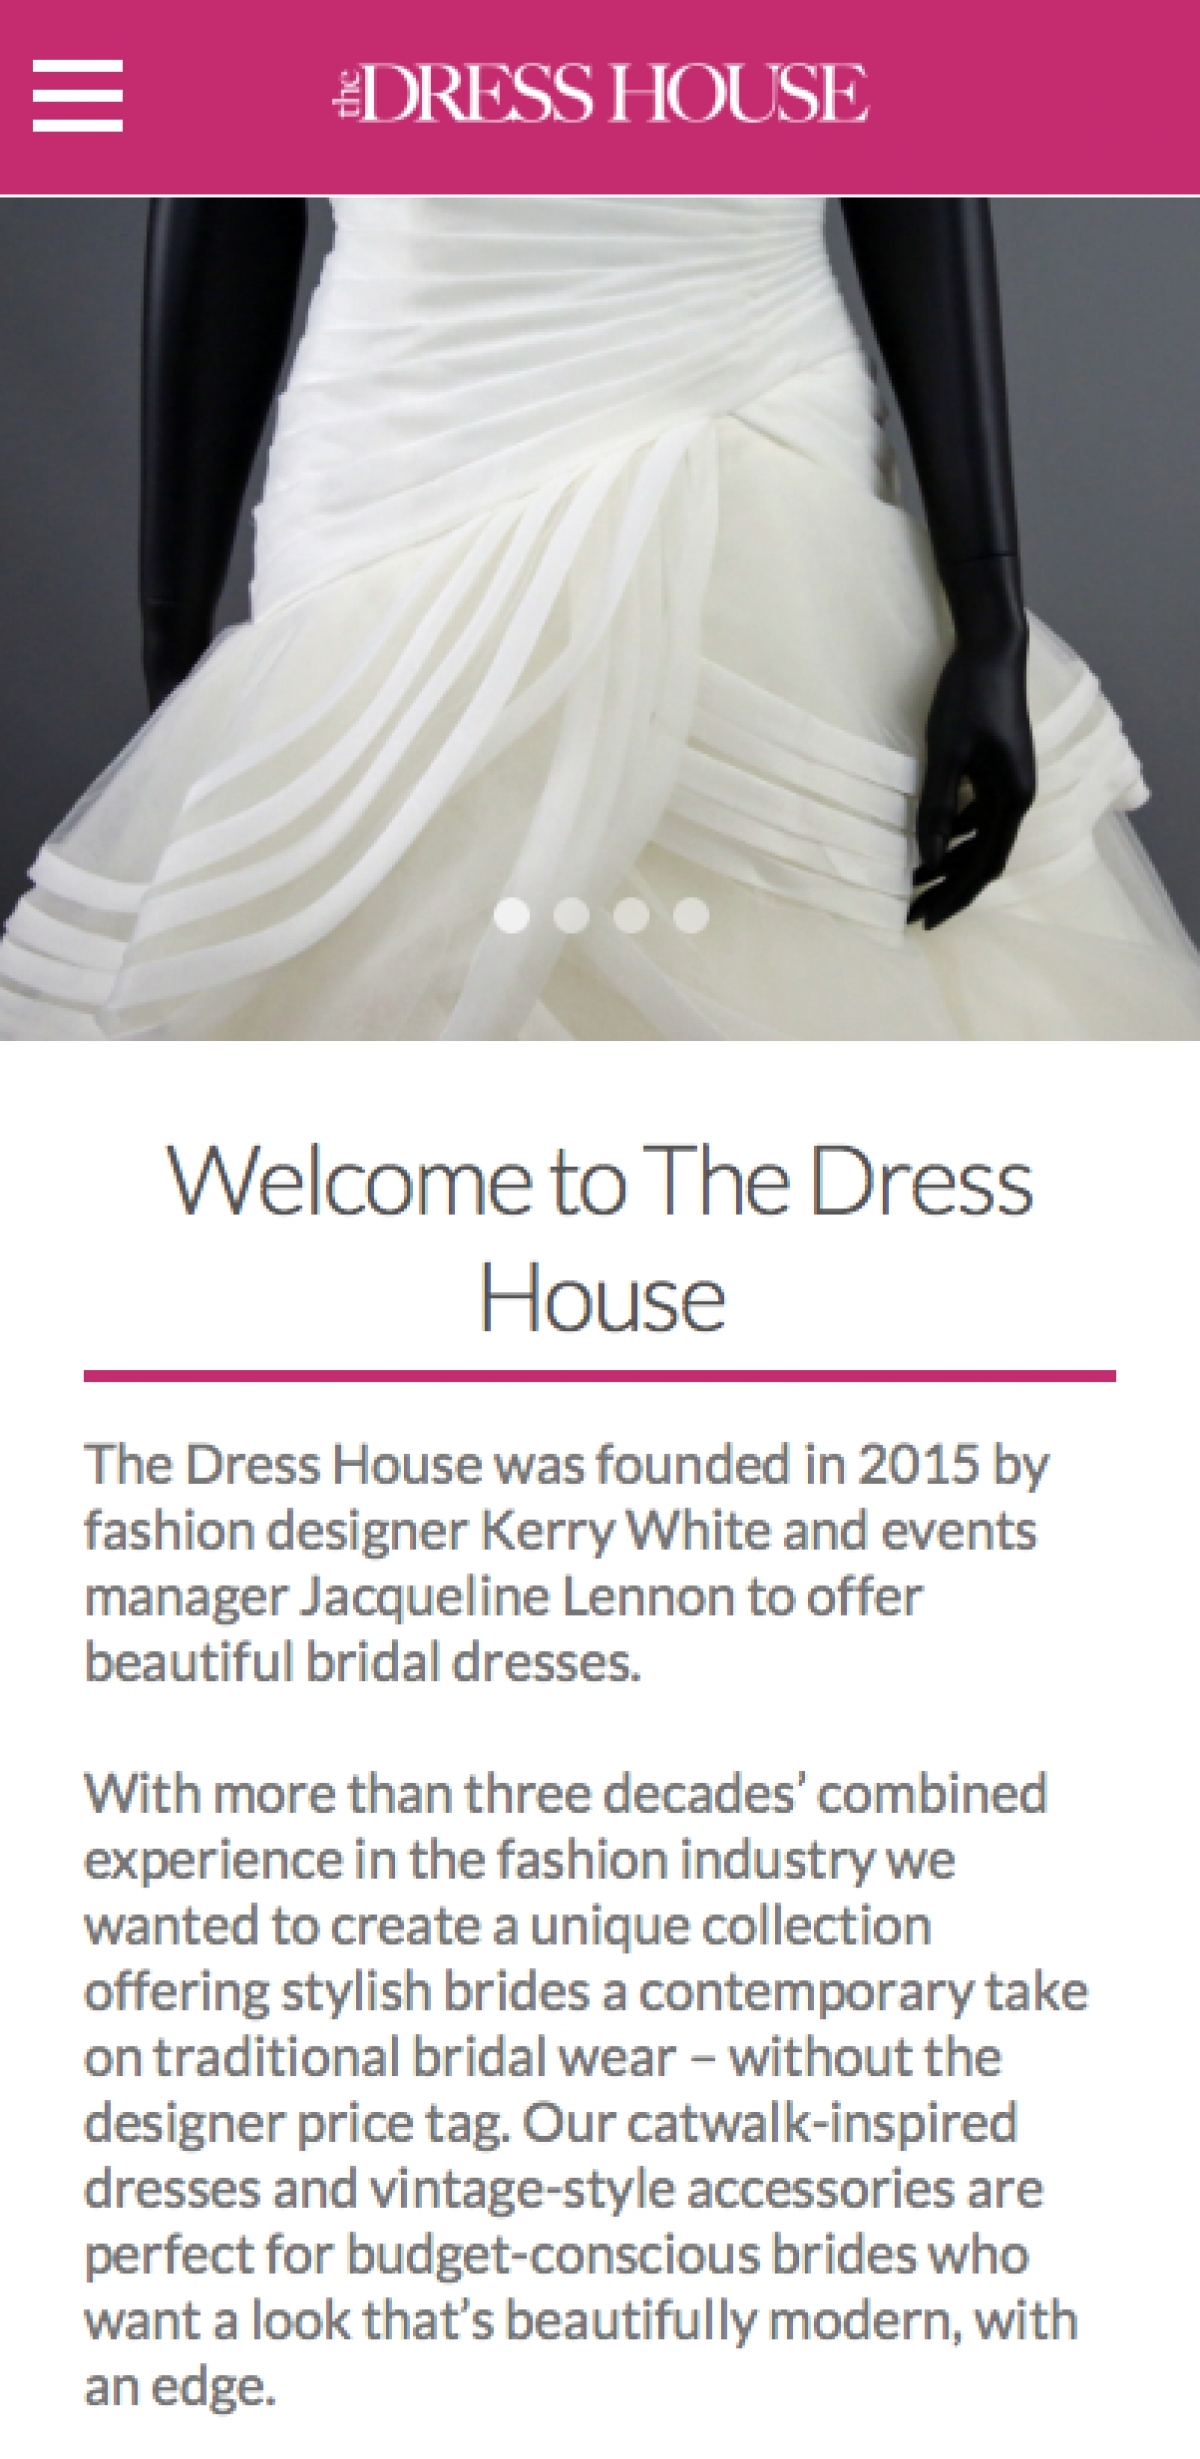 The Dress House - contemporary and traditional wedding dresses Herts Media's first "dot house" site...